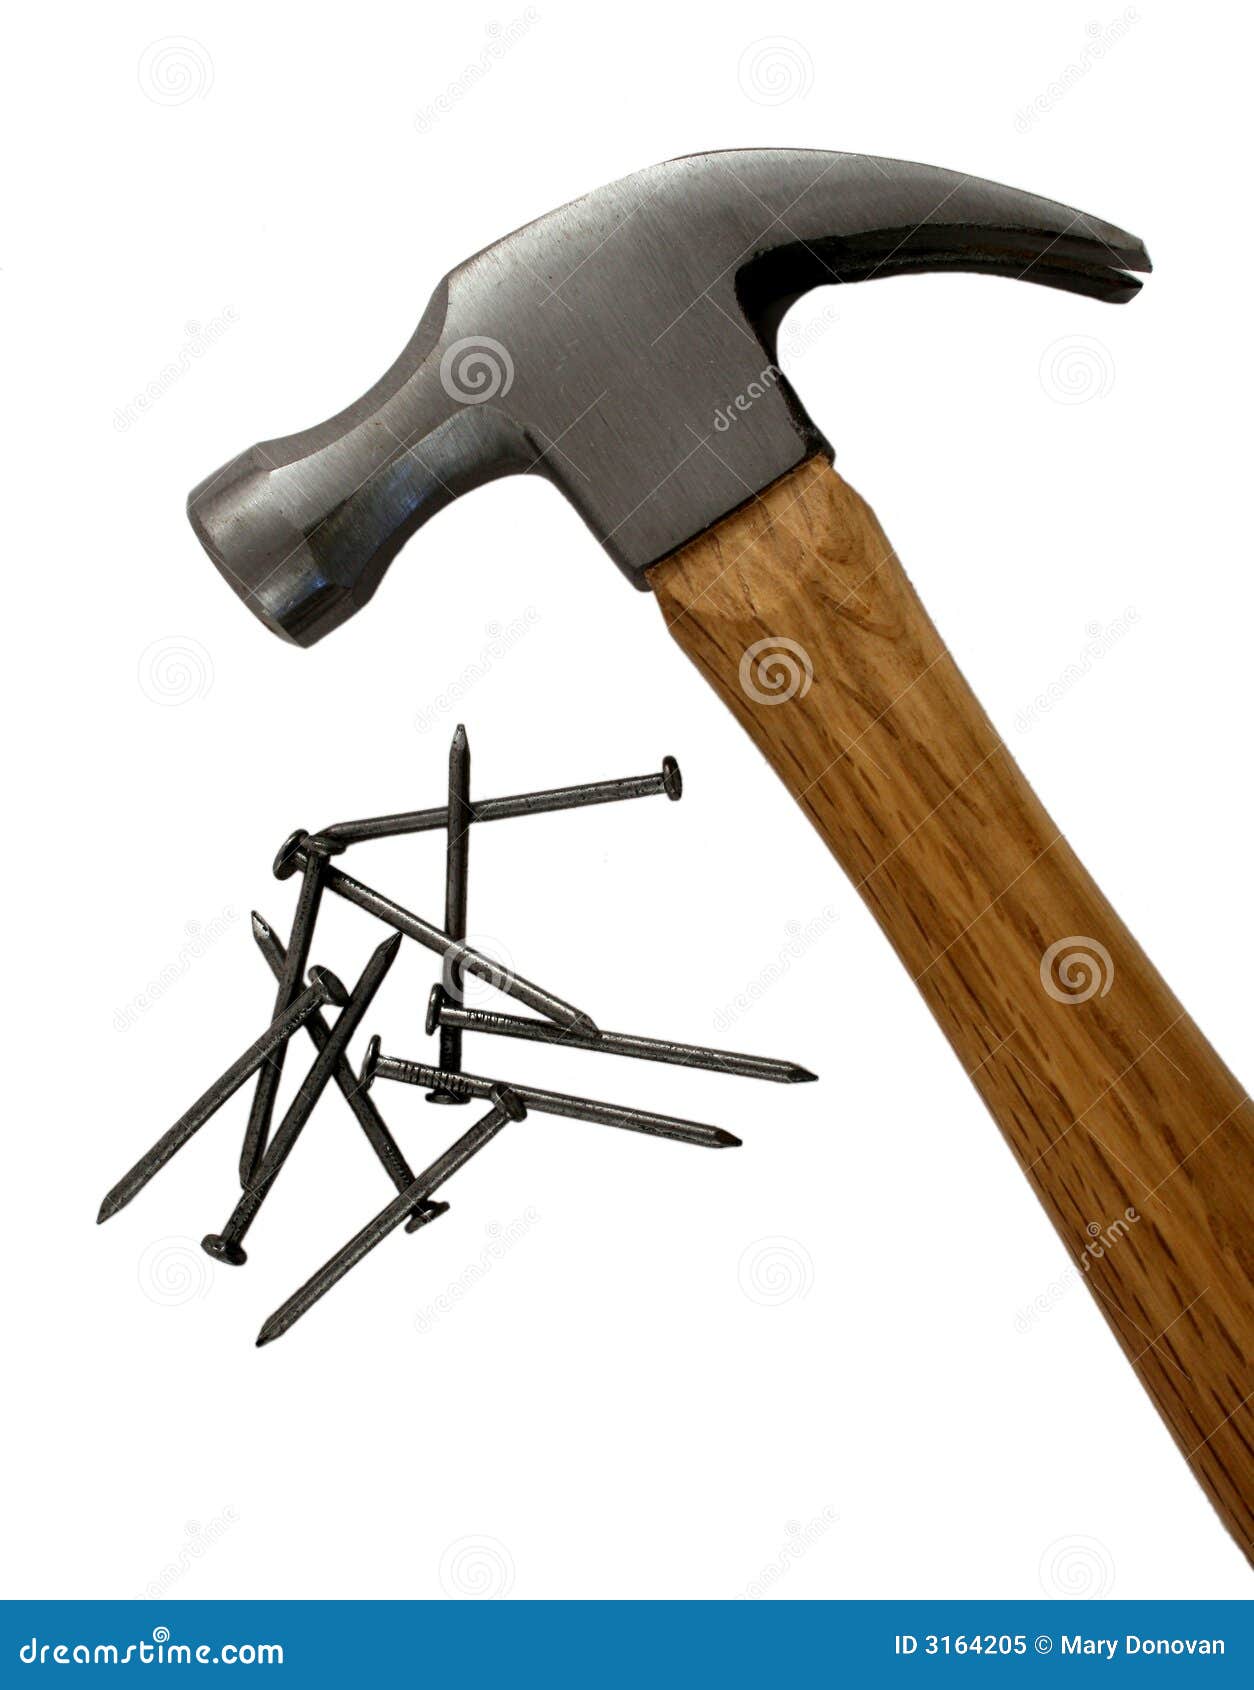 Hammer and nails 6 stock image. Image of carpentry, wood - 11083167